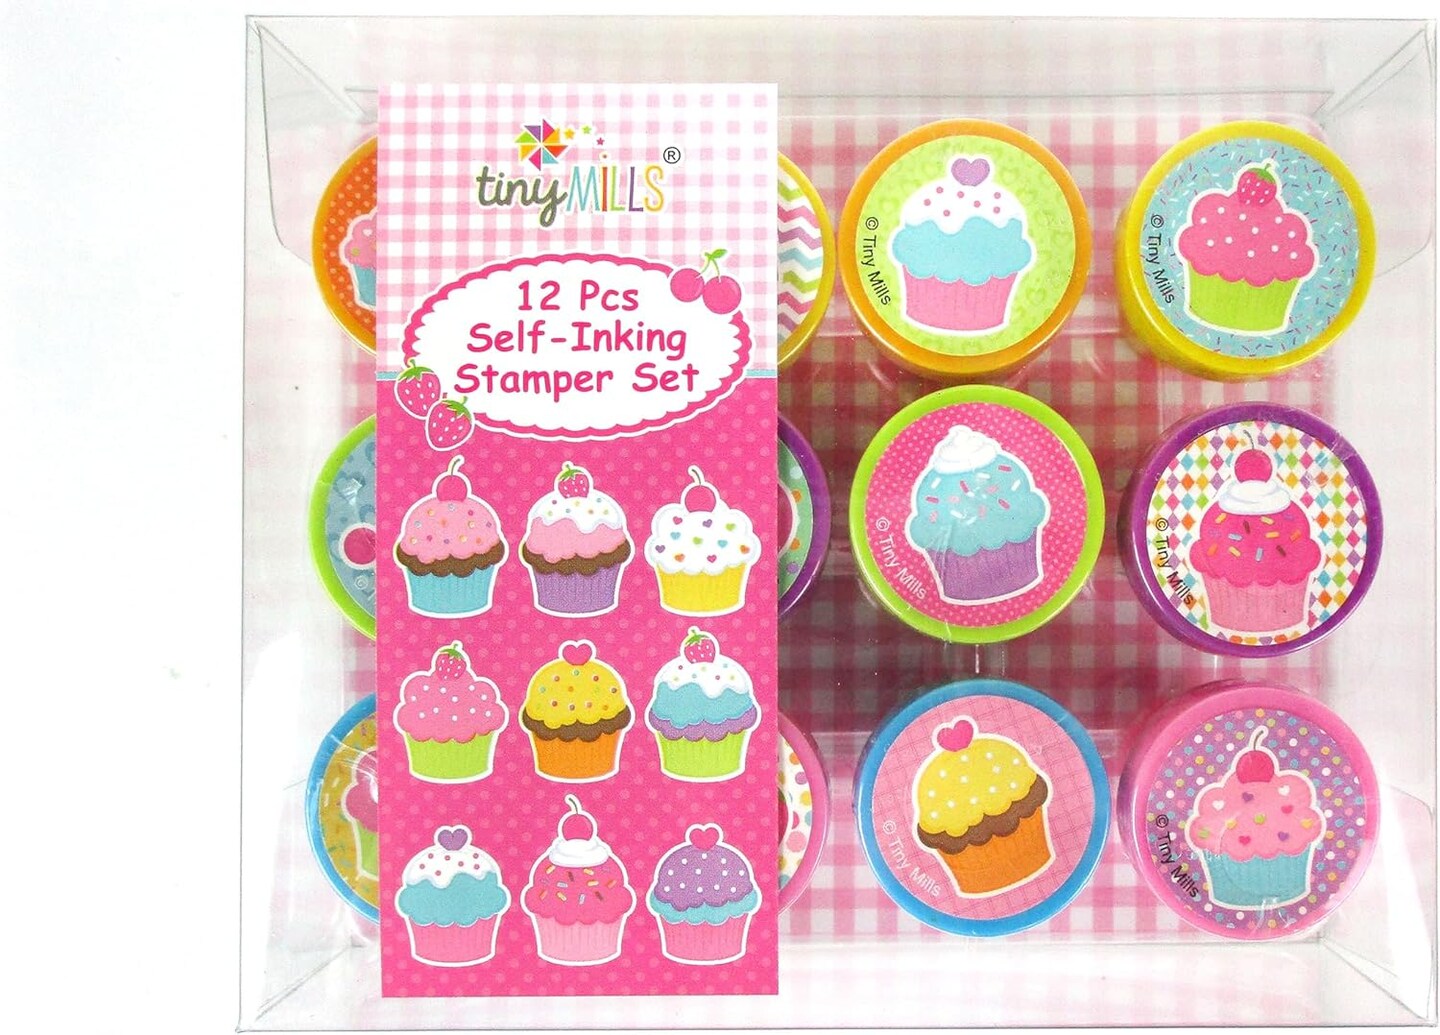 TINYMILLS 12 Pcs Cupcakes Stamp Kit for Kids - Cupcake Self Inking Stamps Gift Party Favors